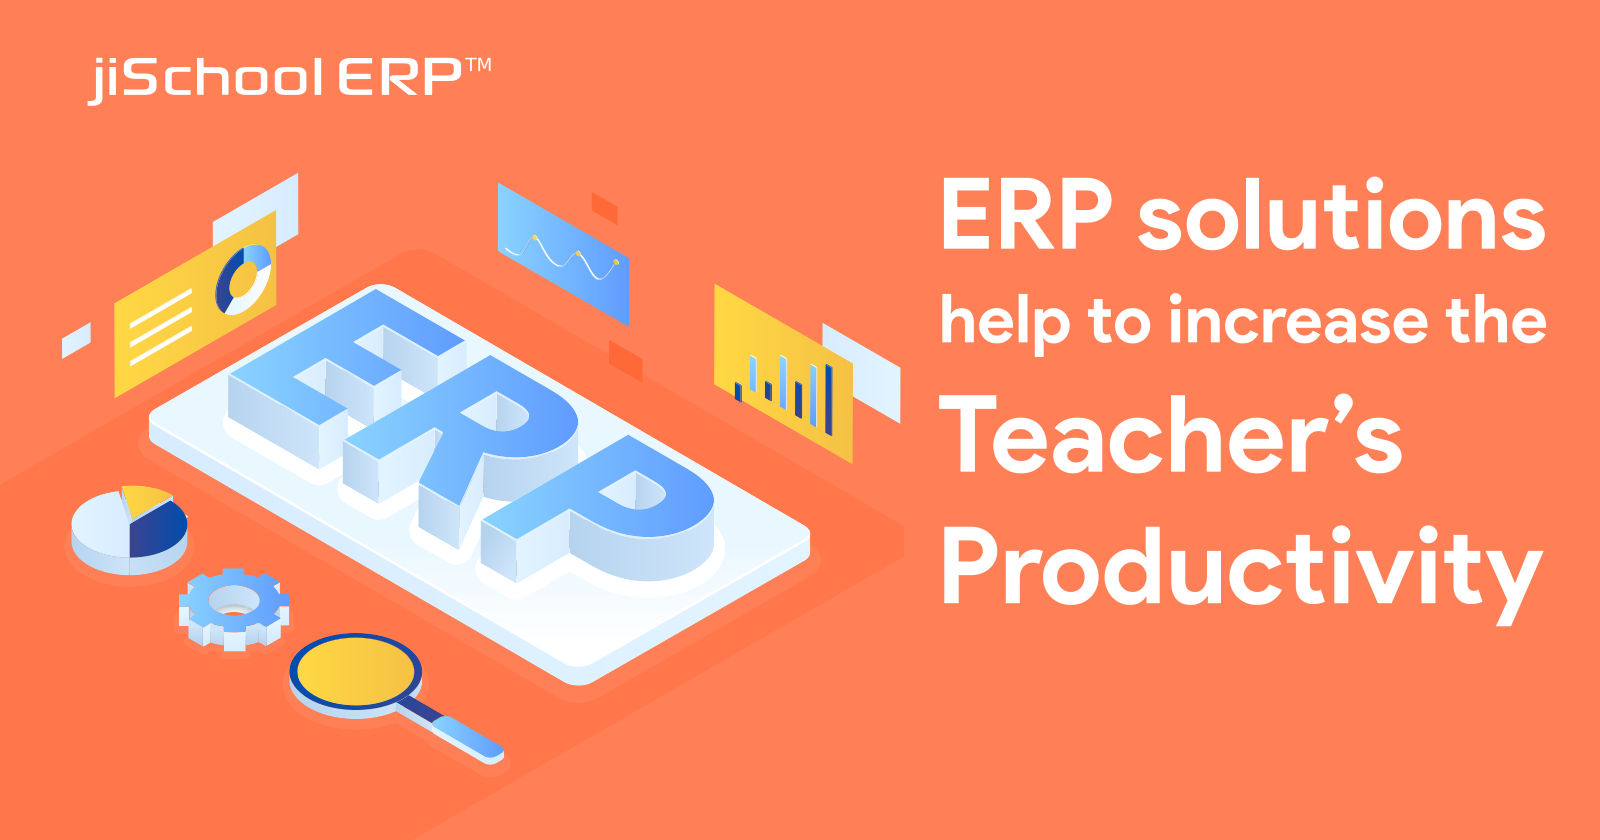 How can ERP solutions help to improve the teacher’s productivity?